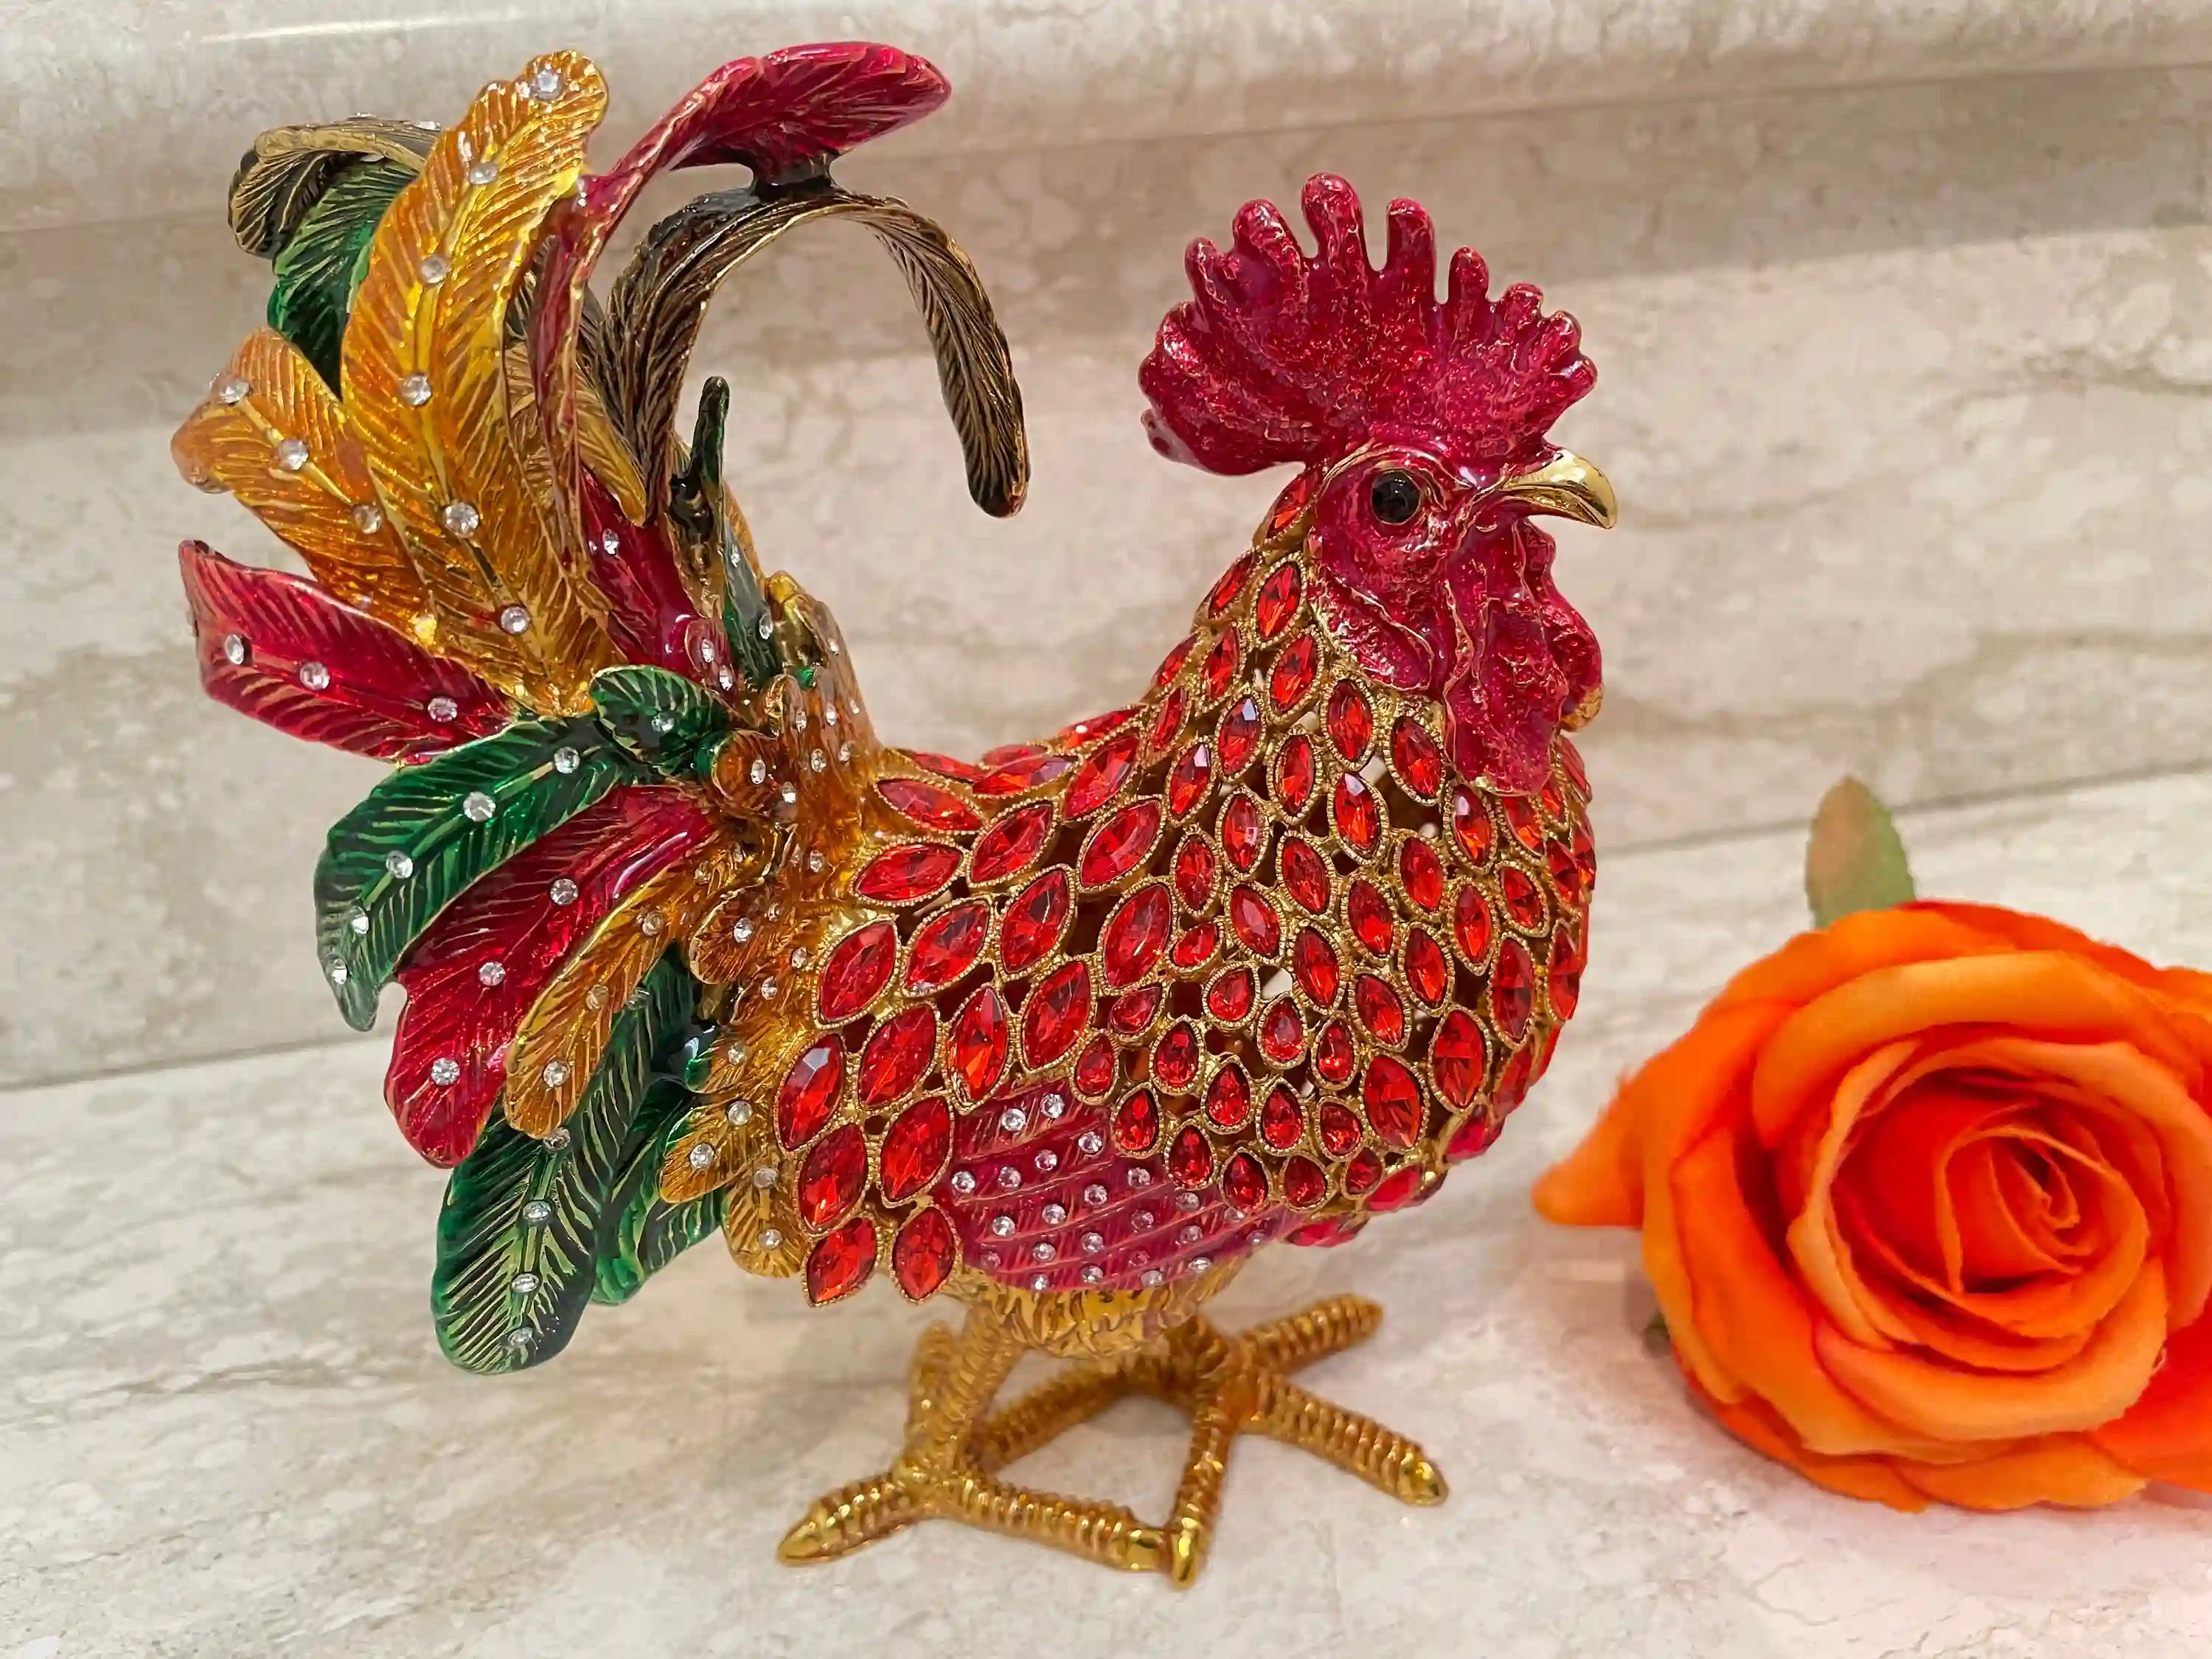 2002 Vintage RUBY Red Faberge Egg Rooster Jewelry Box, Rooster Lover 21st Birthday 21 Anniversary Gift for Graduation present for Christmas 